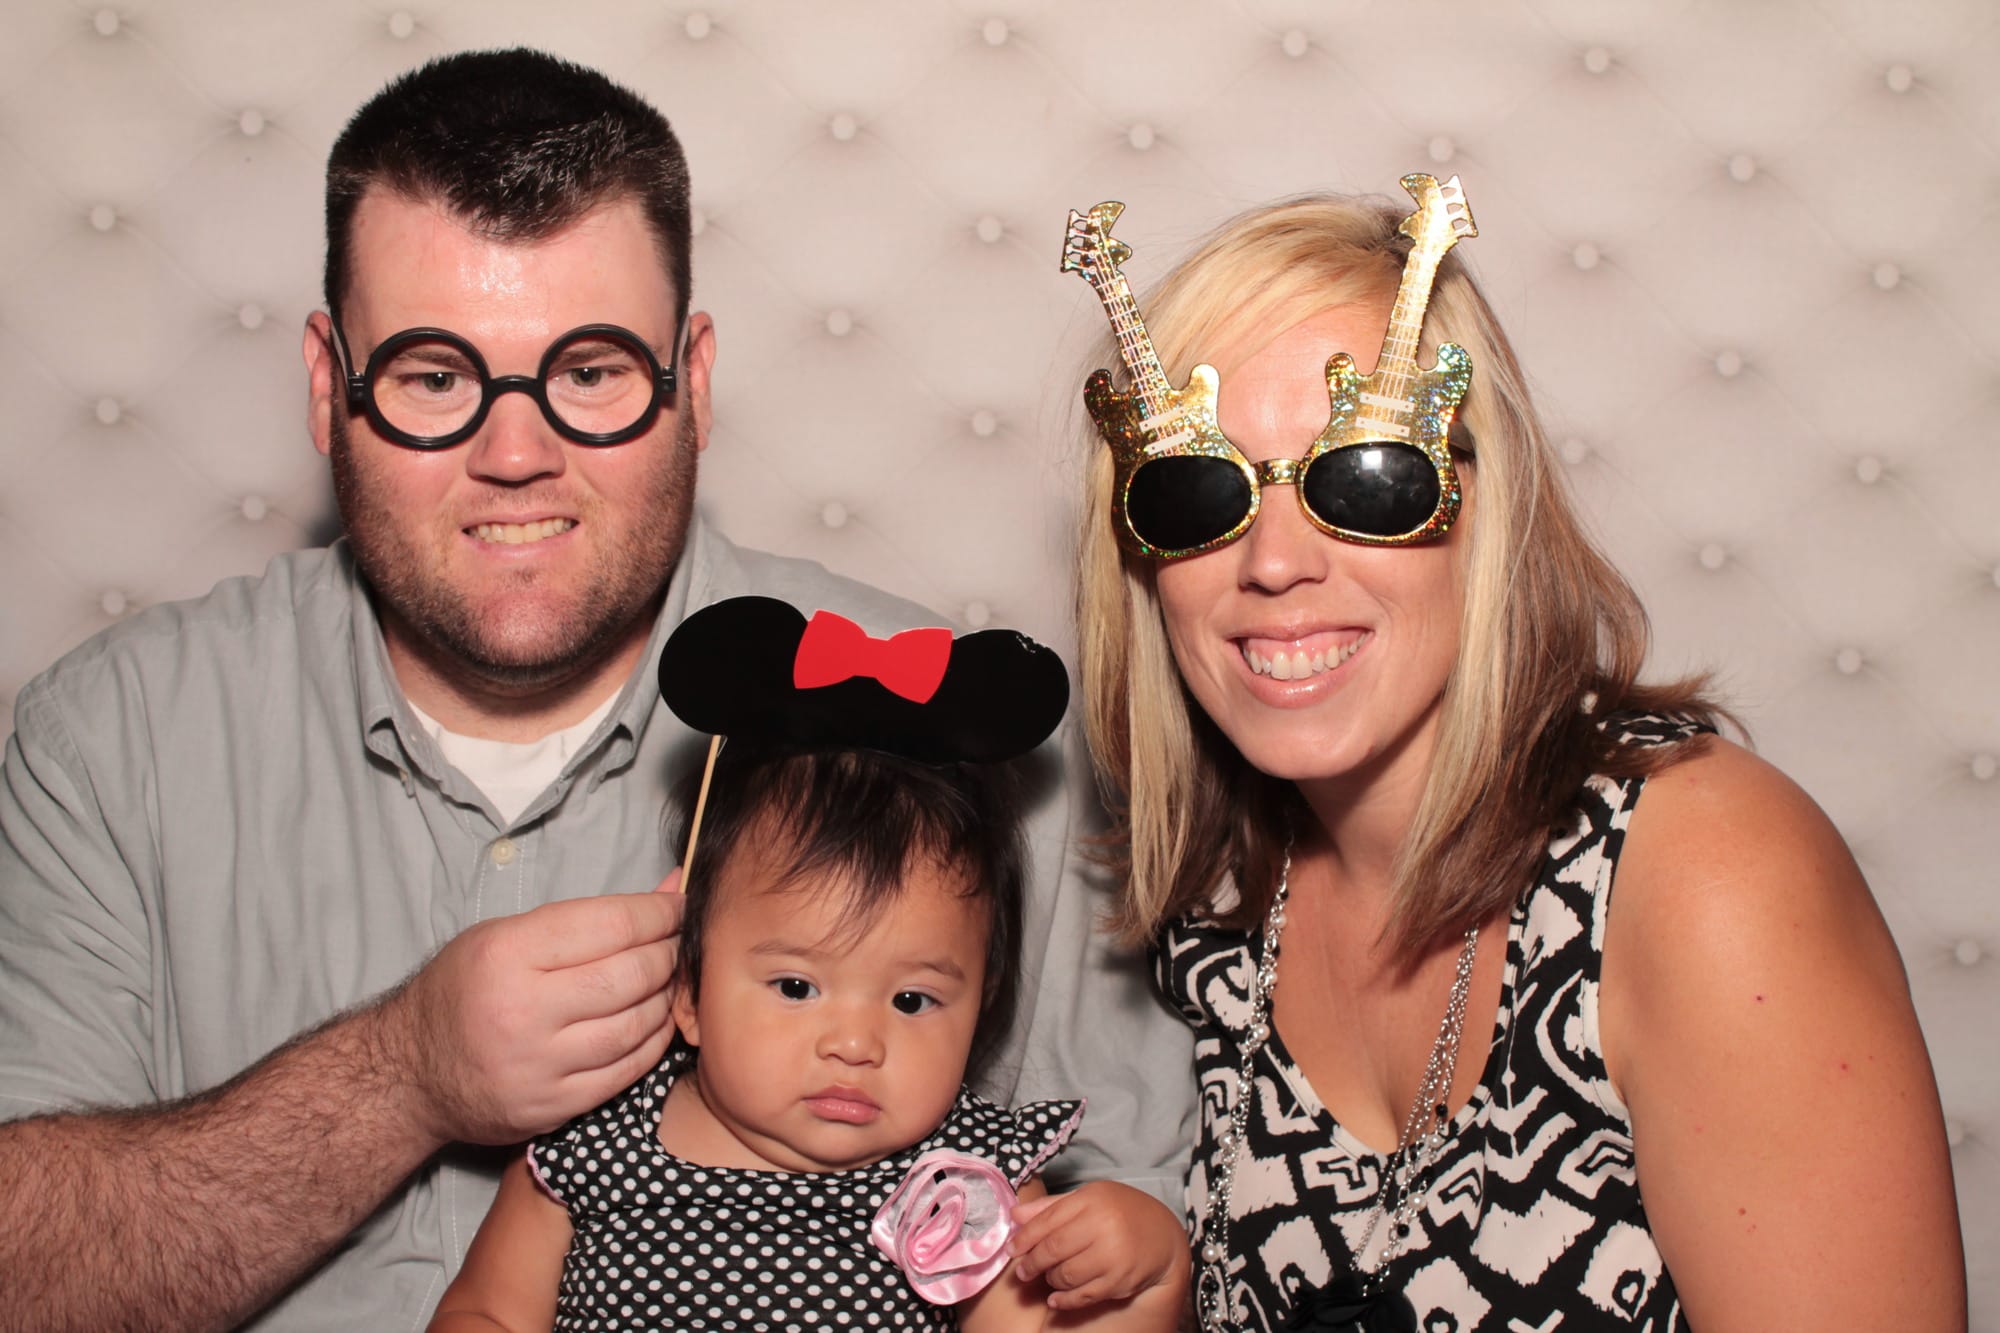 Photo-Booth-Rental-Austin-Wedding-Reception-Party-Awesome-No.1-Affordable-Social-Media-Best-LGBT-